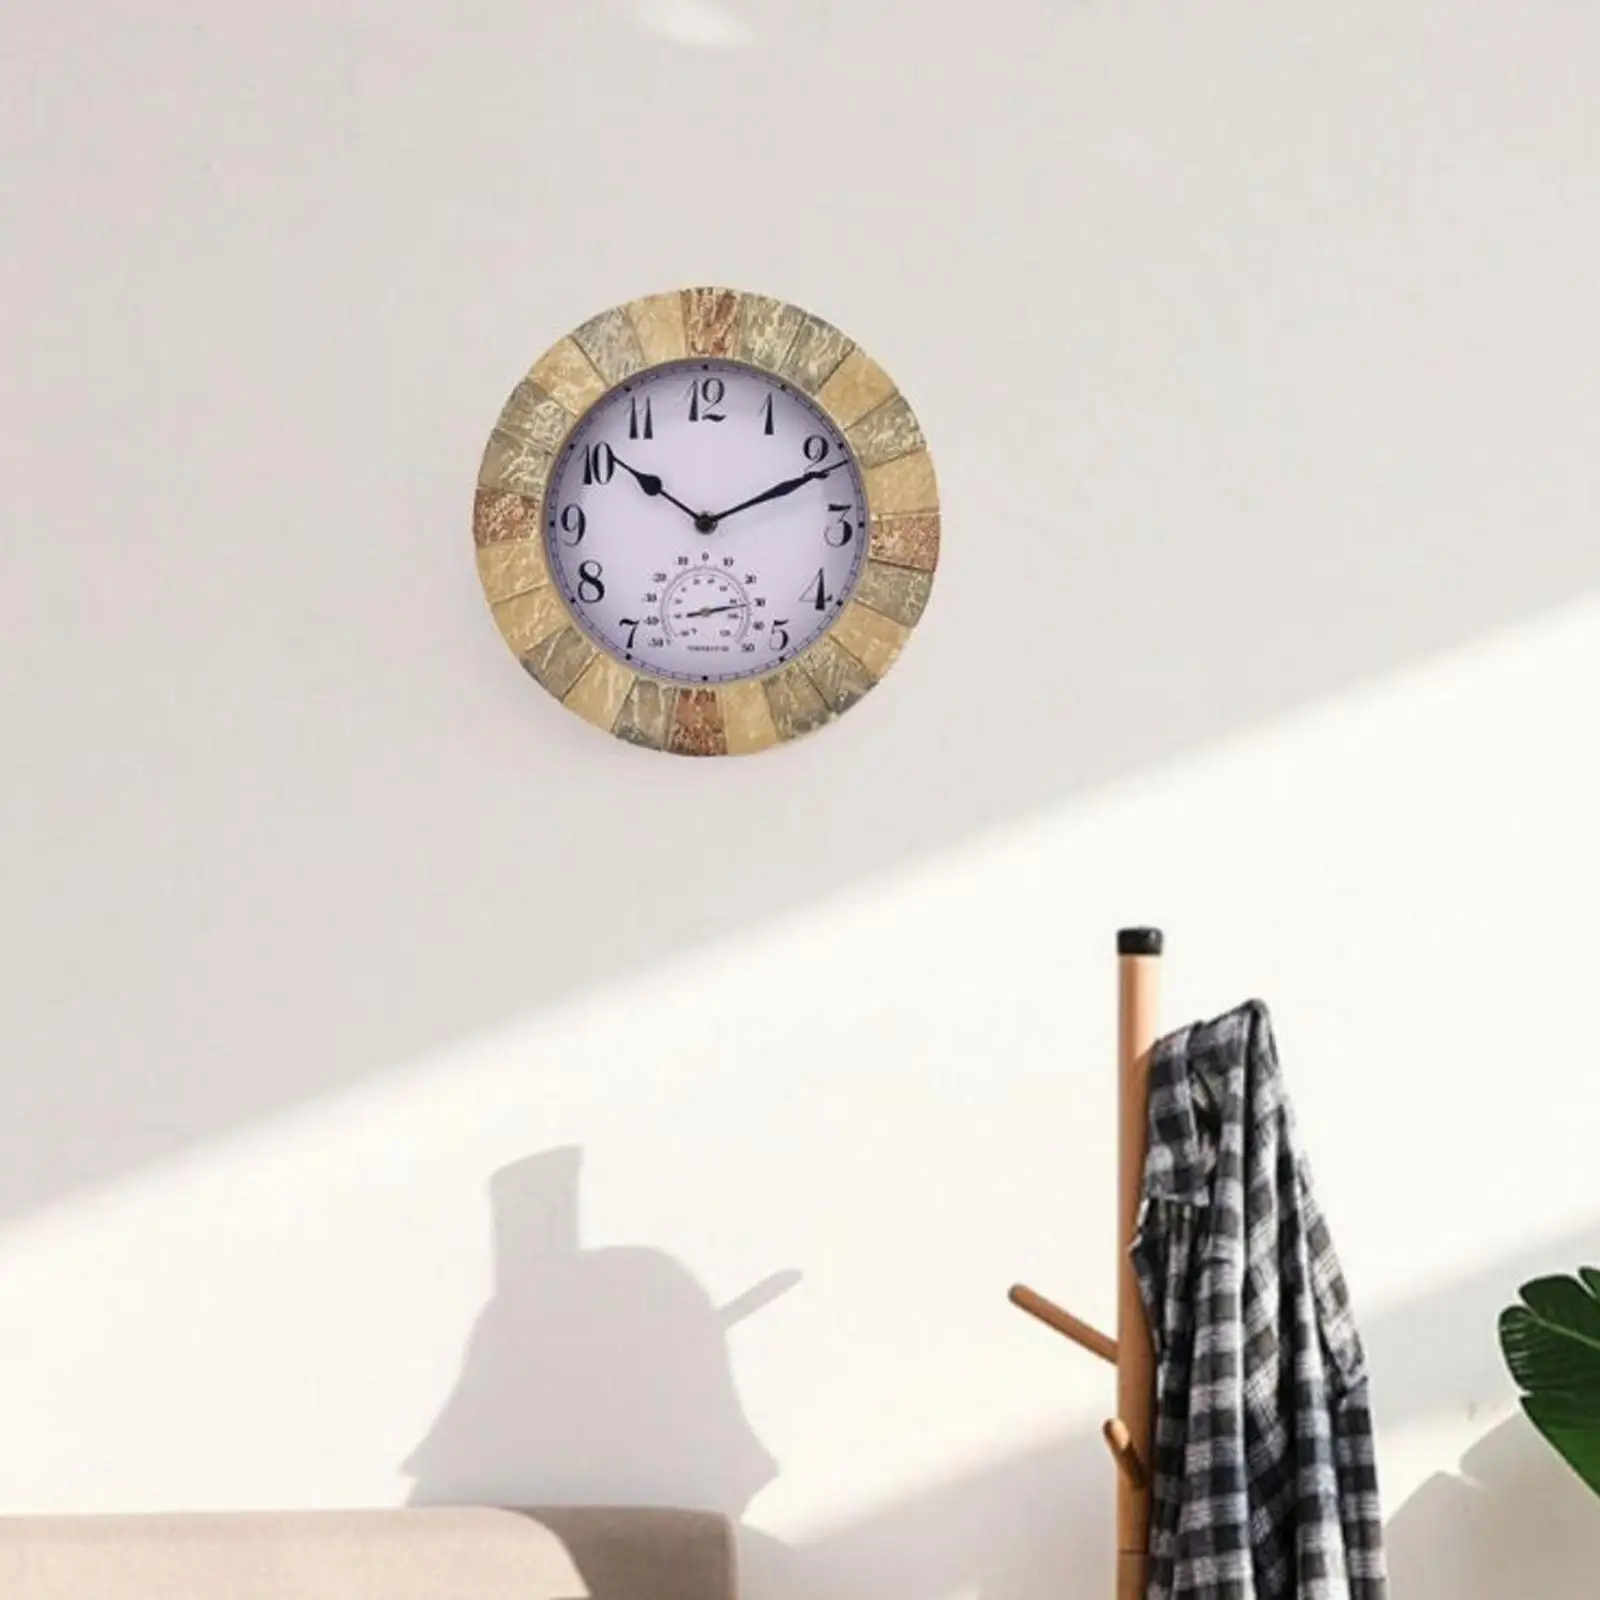 Outdoor Wall Clock Waterproof with Temperature for Garden Pool Decorative